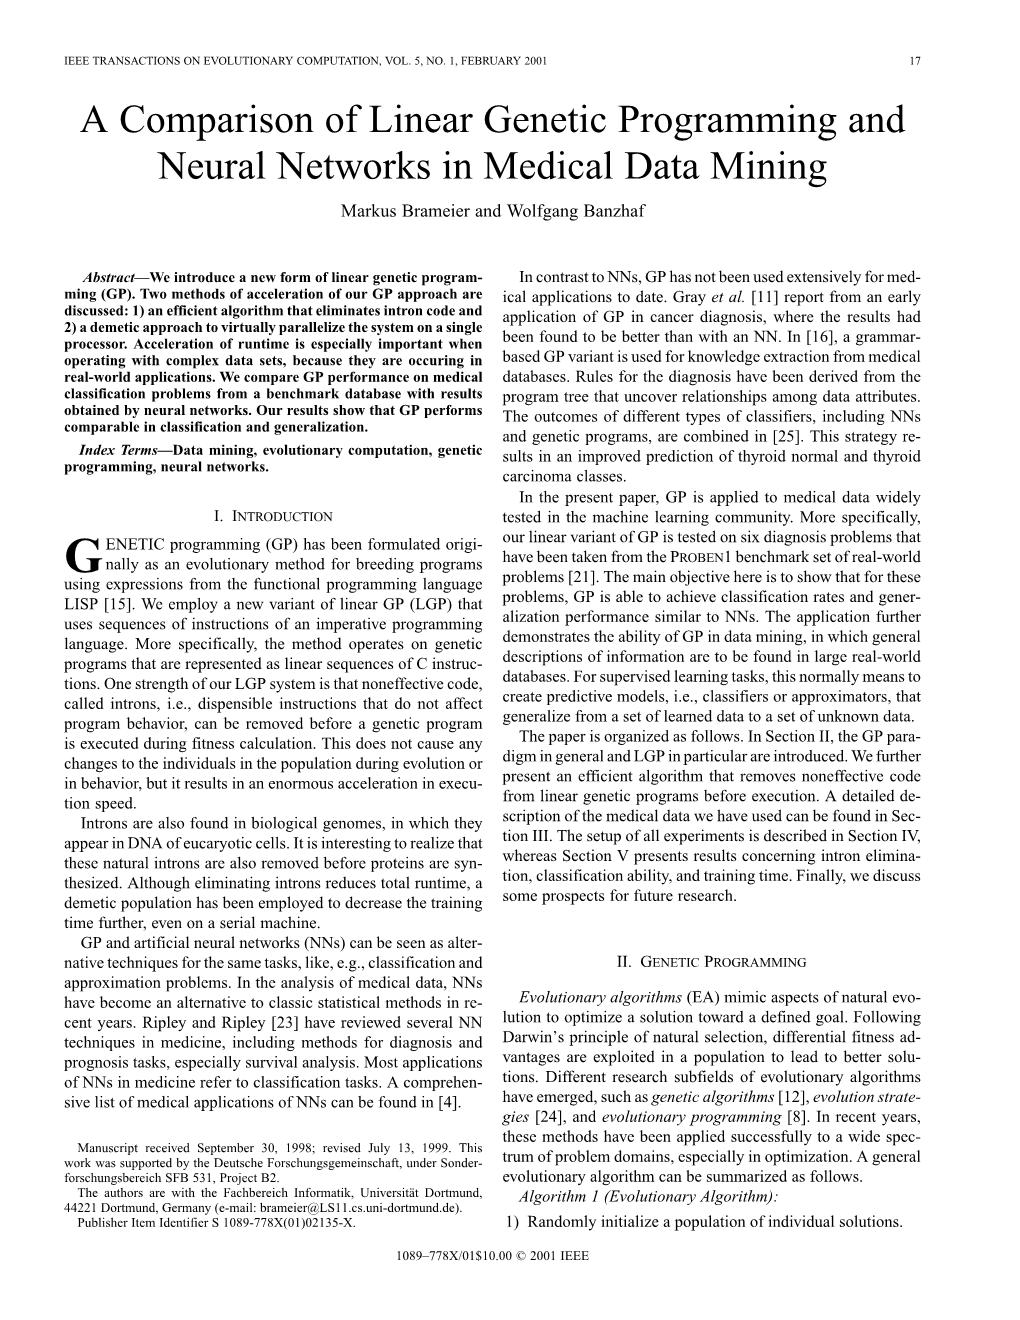 A Comparison of Linear Genetic Programming and Neural Networks in Medical Data Mining Markus Brameier and Wolfgang Banzhaf